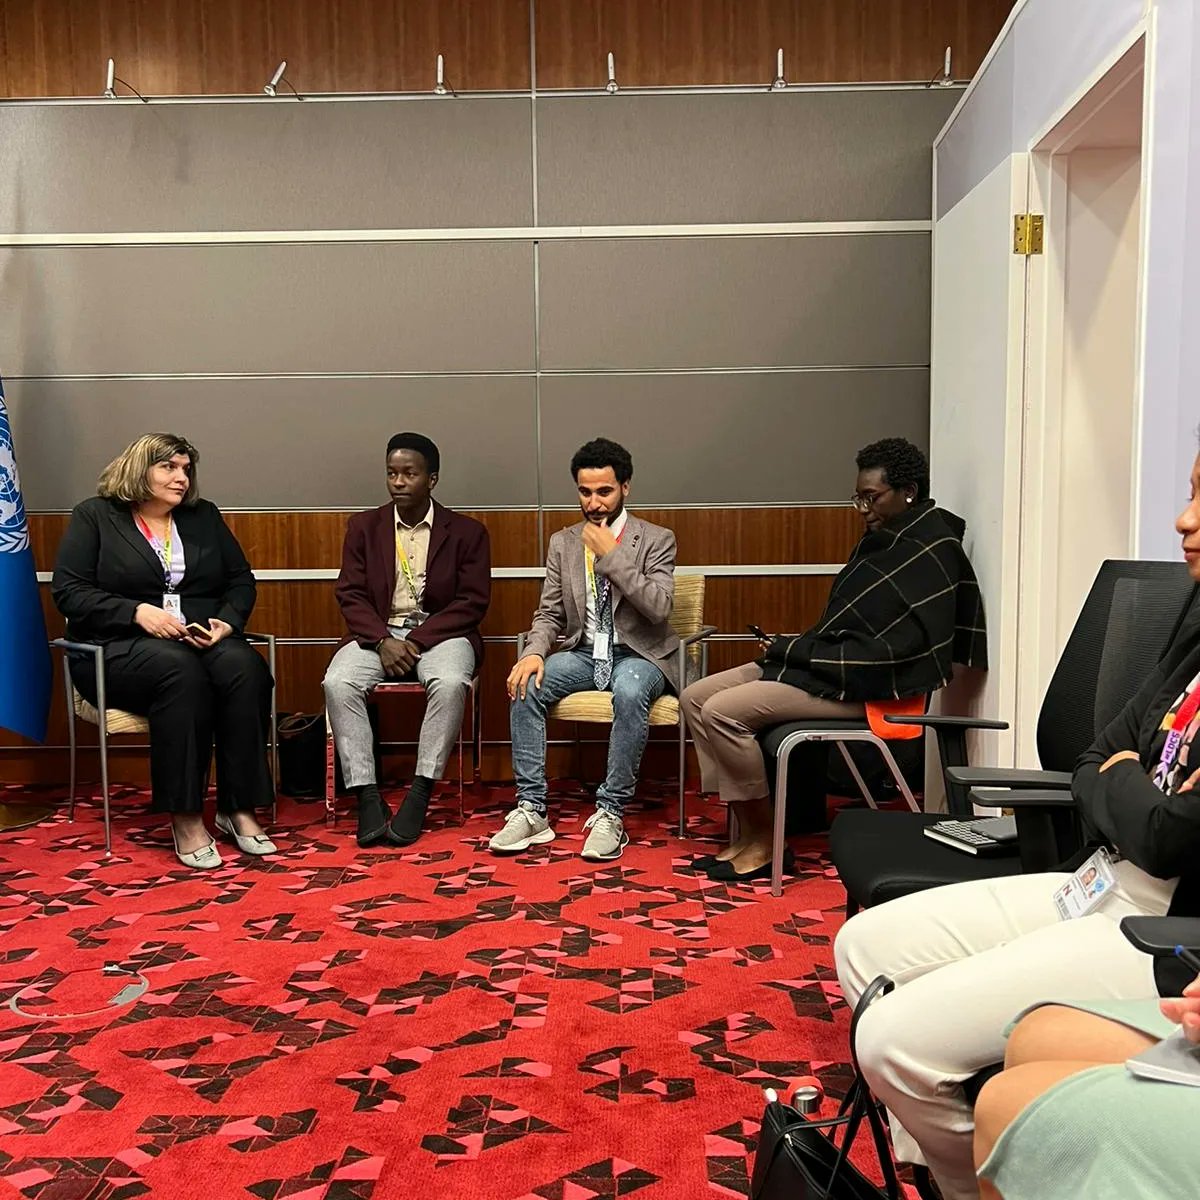 Had chance to be part of the youth discussion with the President of the United Nations Economic and Social Council.

The discussion was focused on Youth Participation in the Youth Forum that will take place in the first half of this year in New York.

#LDC5